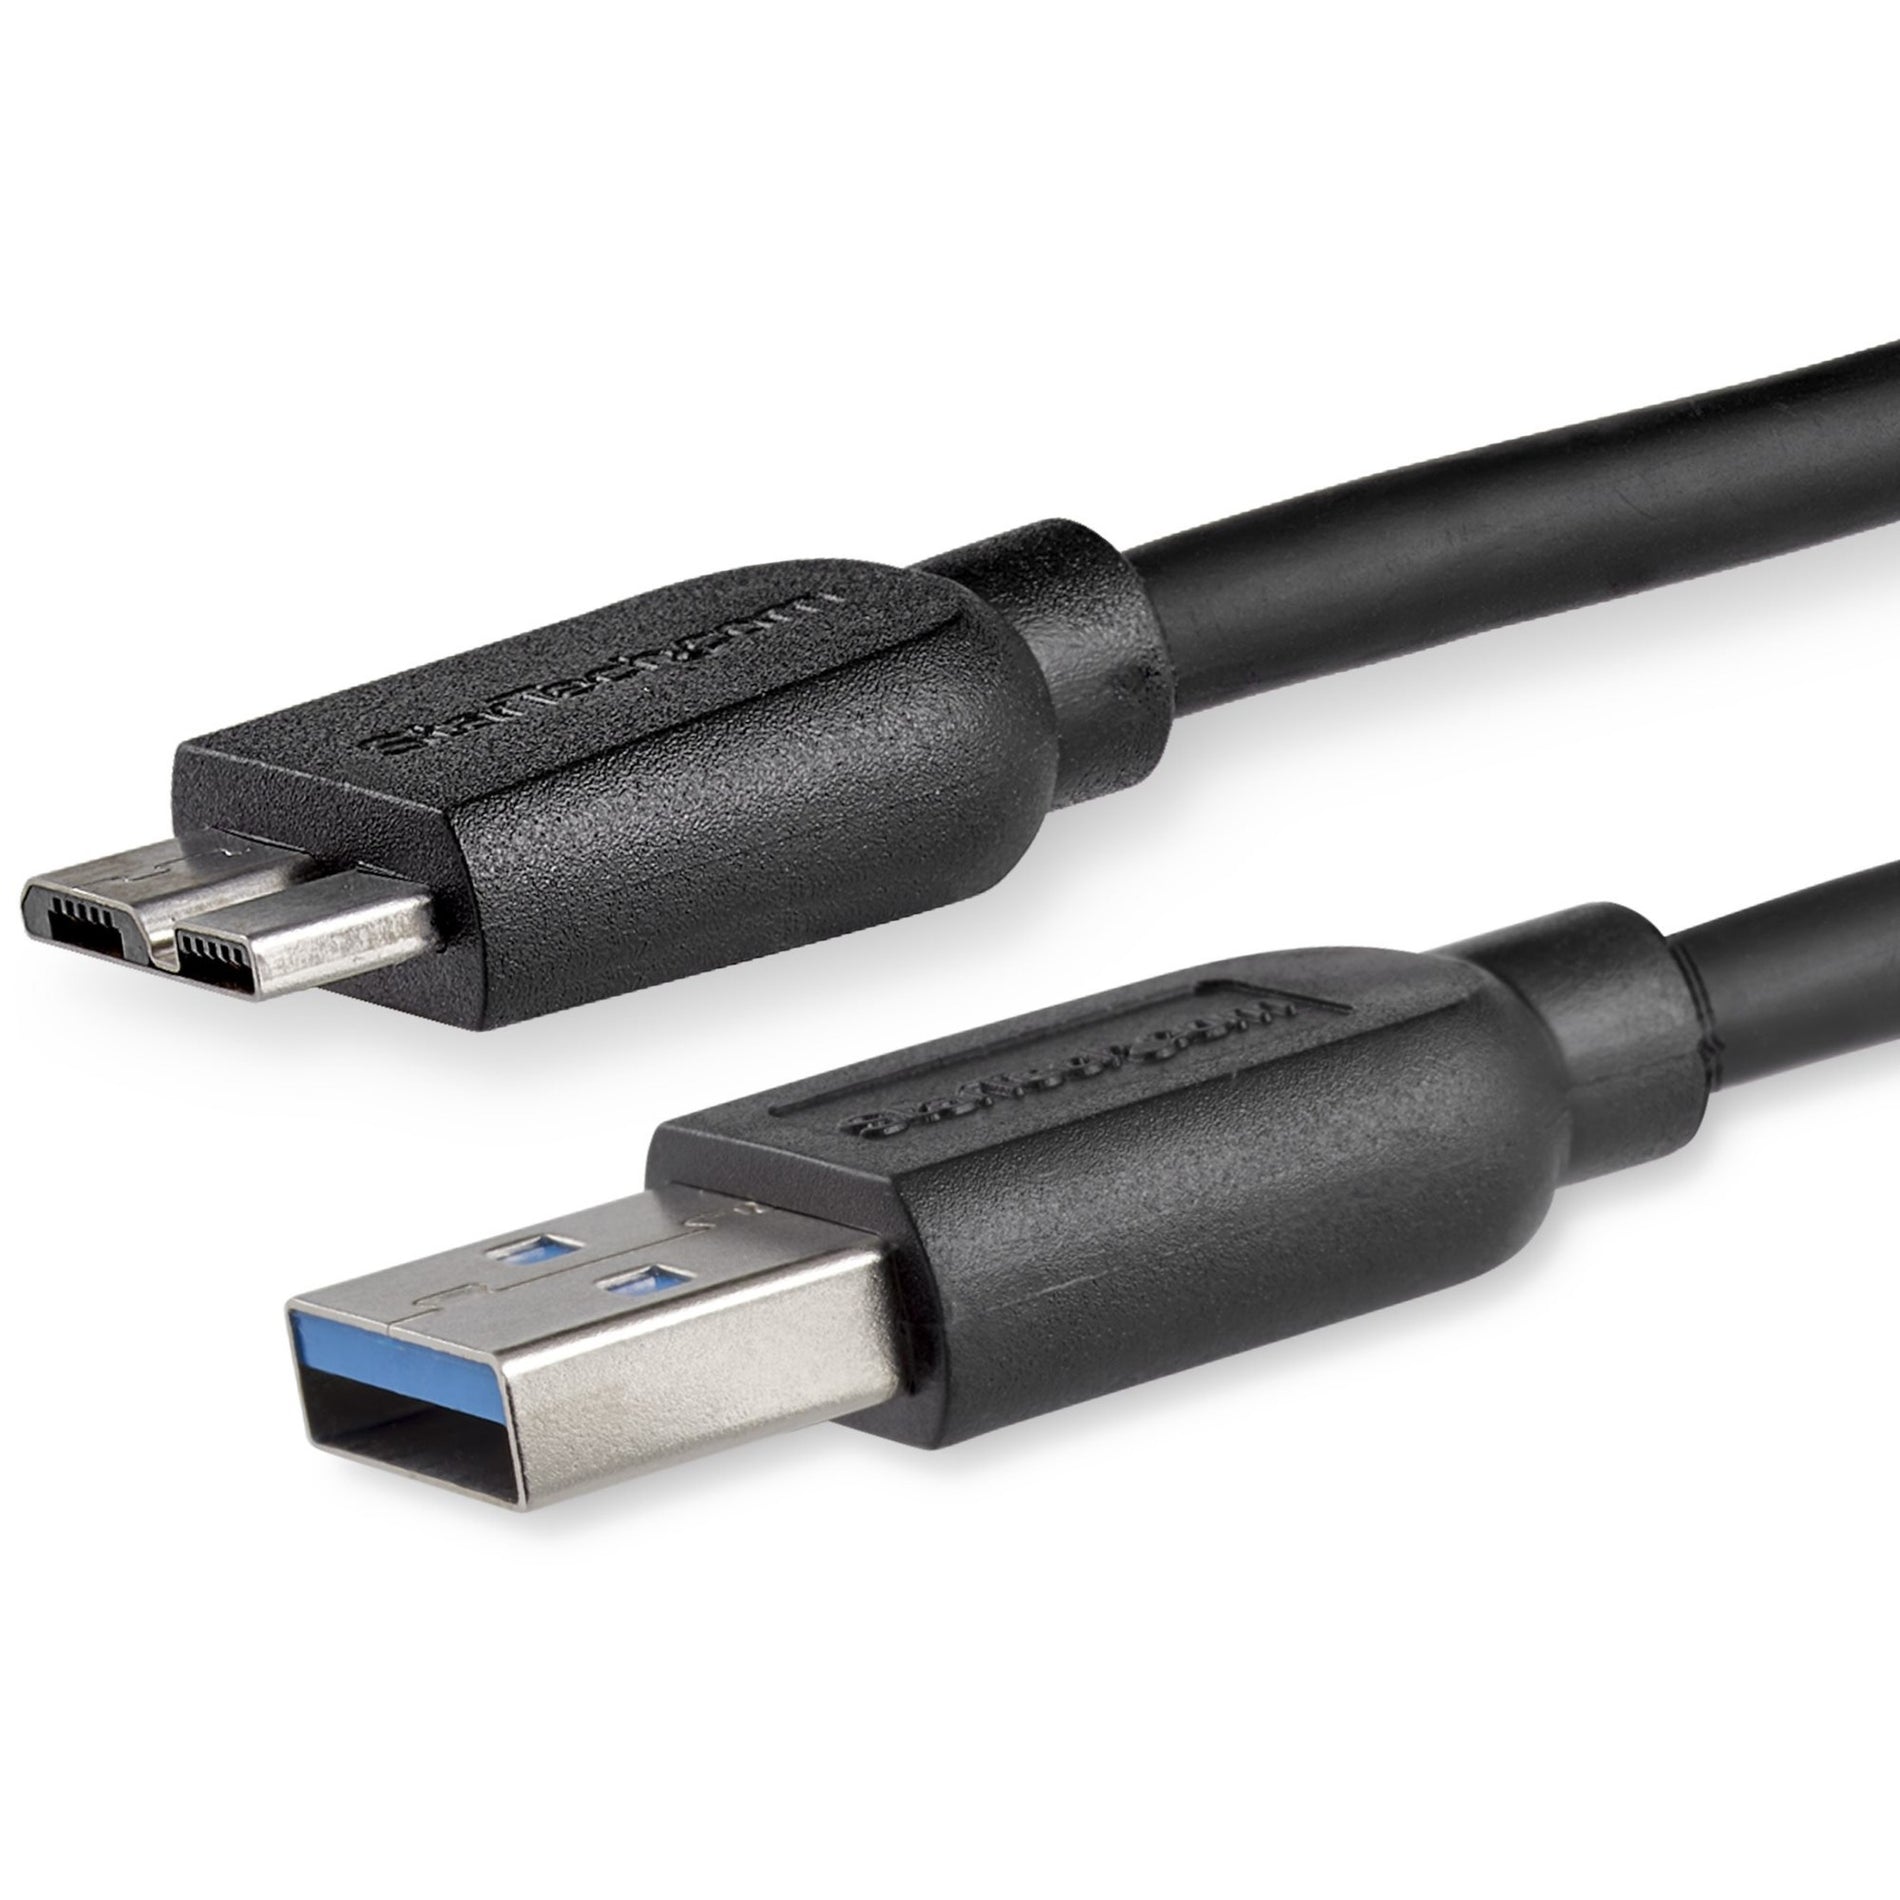 StarTech.com USB3AUB2MS 2m (6ft) Slim SuperSpeed USB 3.0 A to Micro B Cable - M/M, Fast Data Transfer, Flexible and Durable